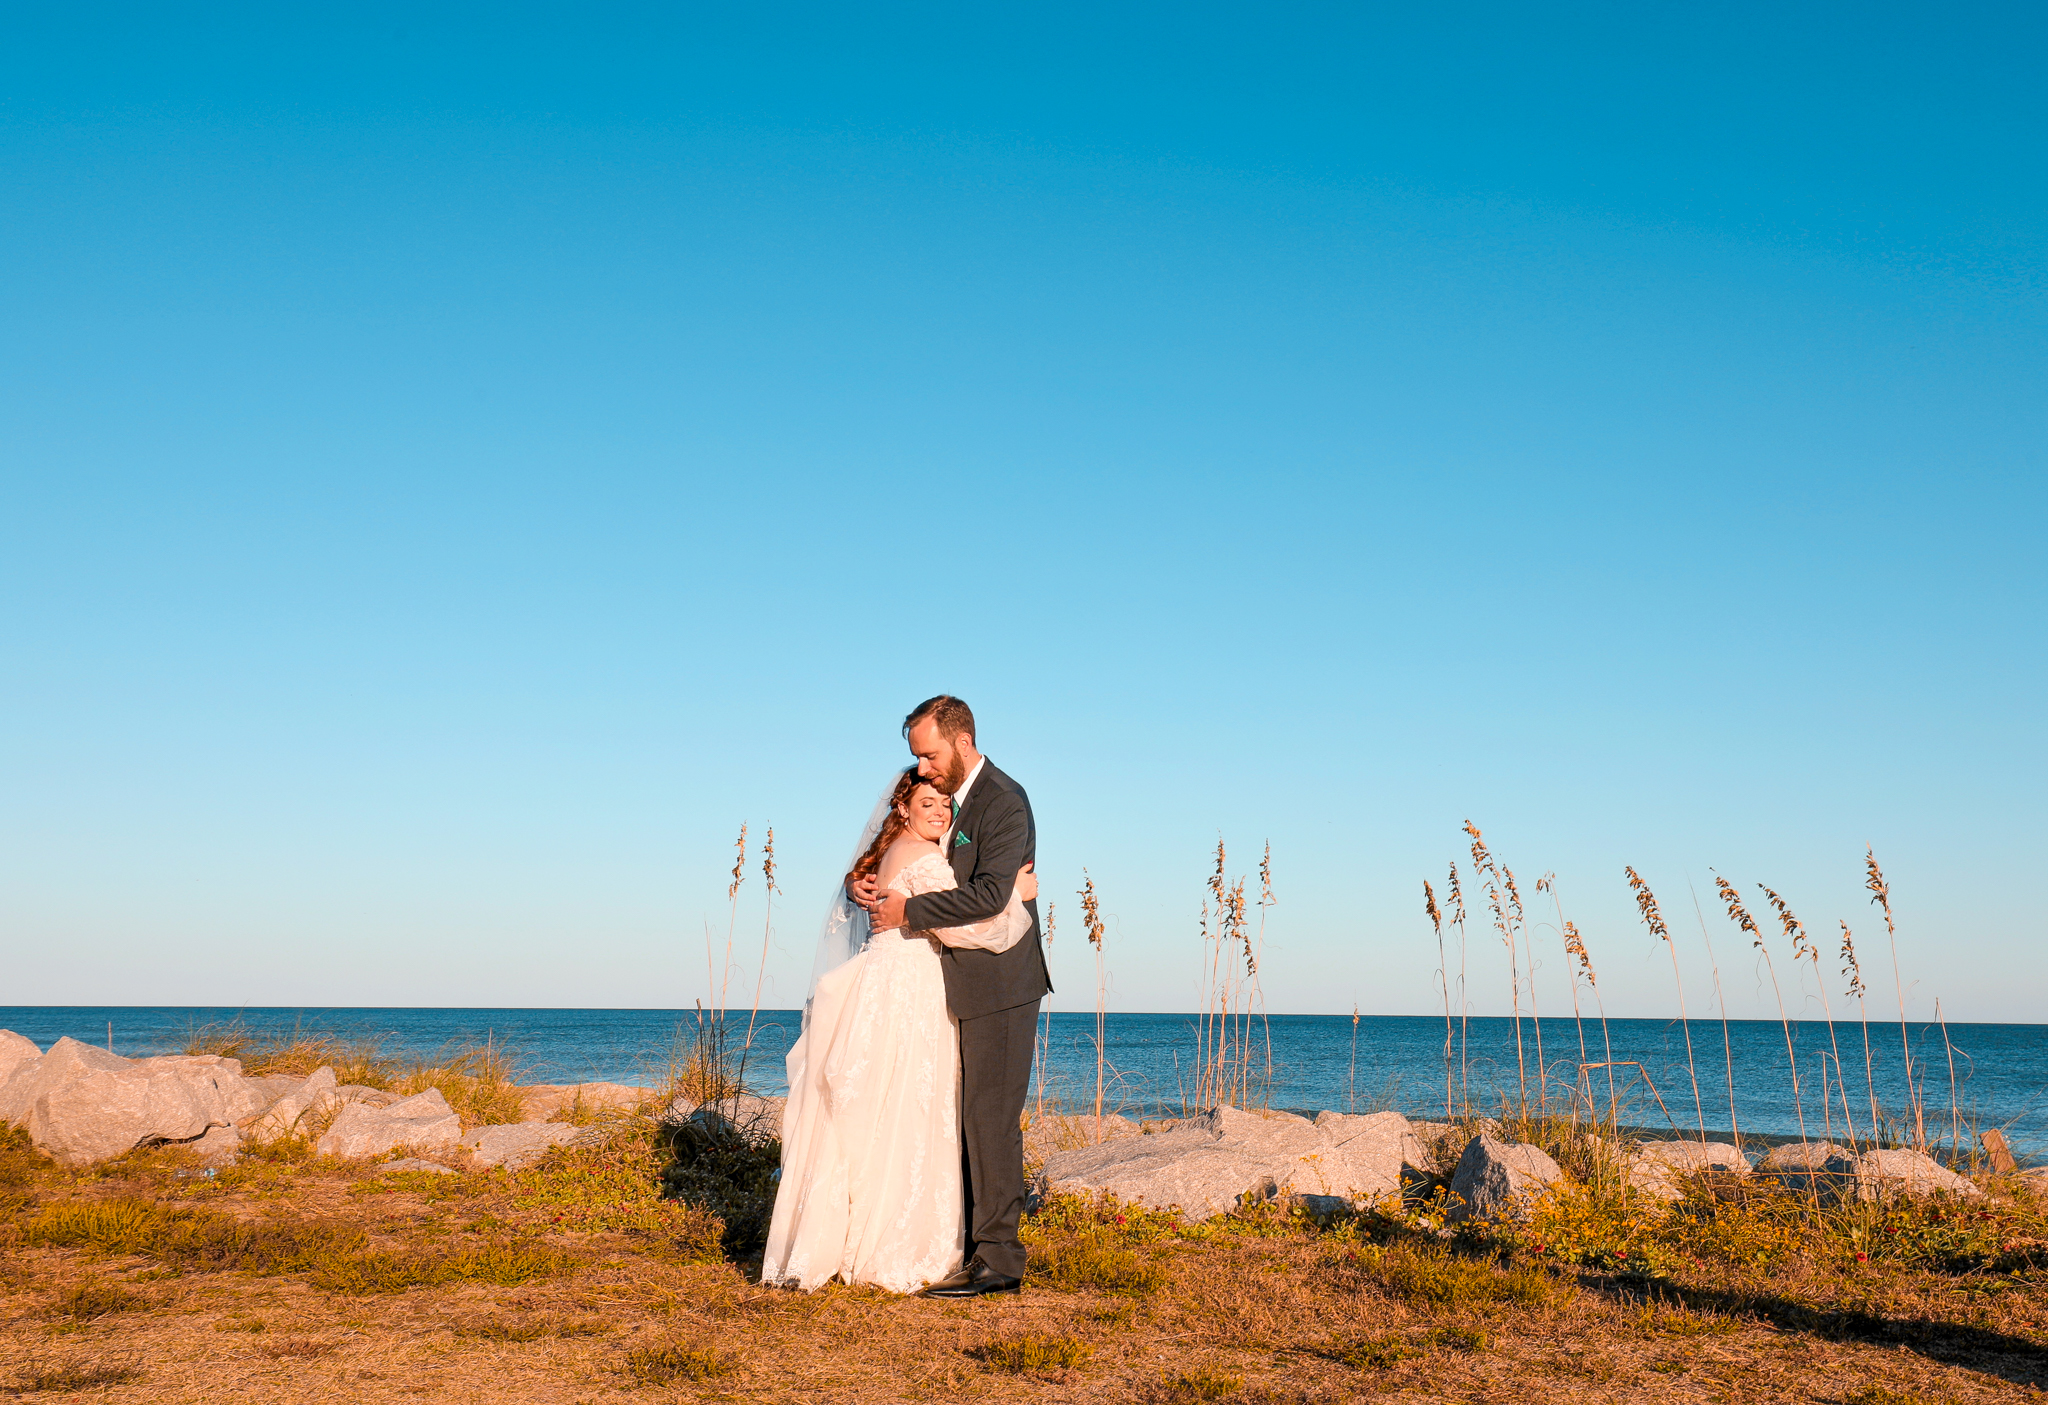 The North Carolina coast is a beautiful place for wedding photography. 